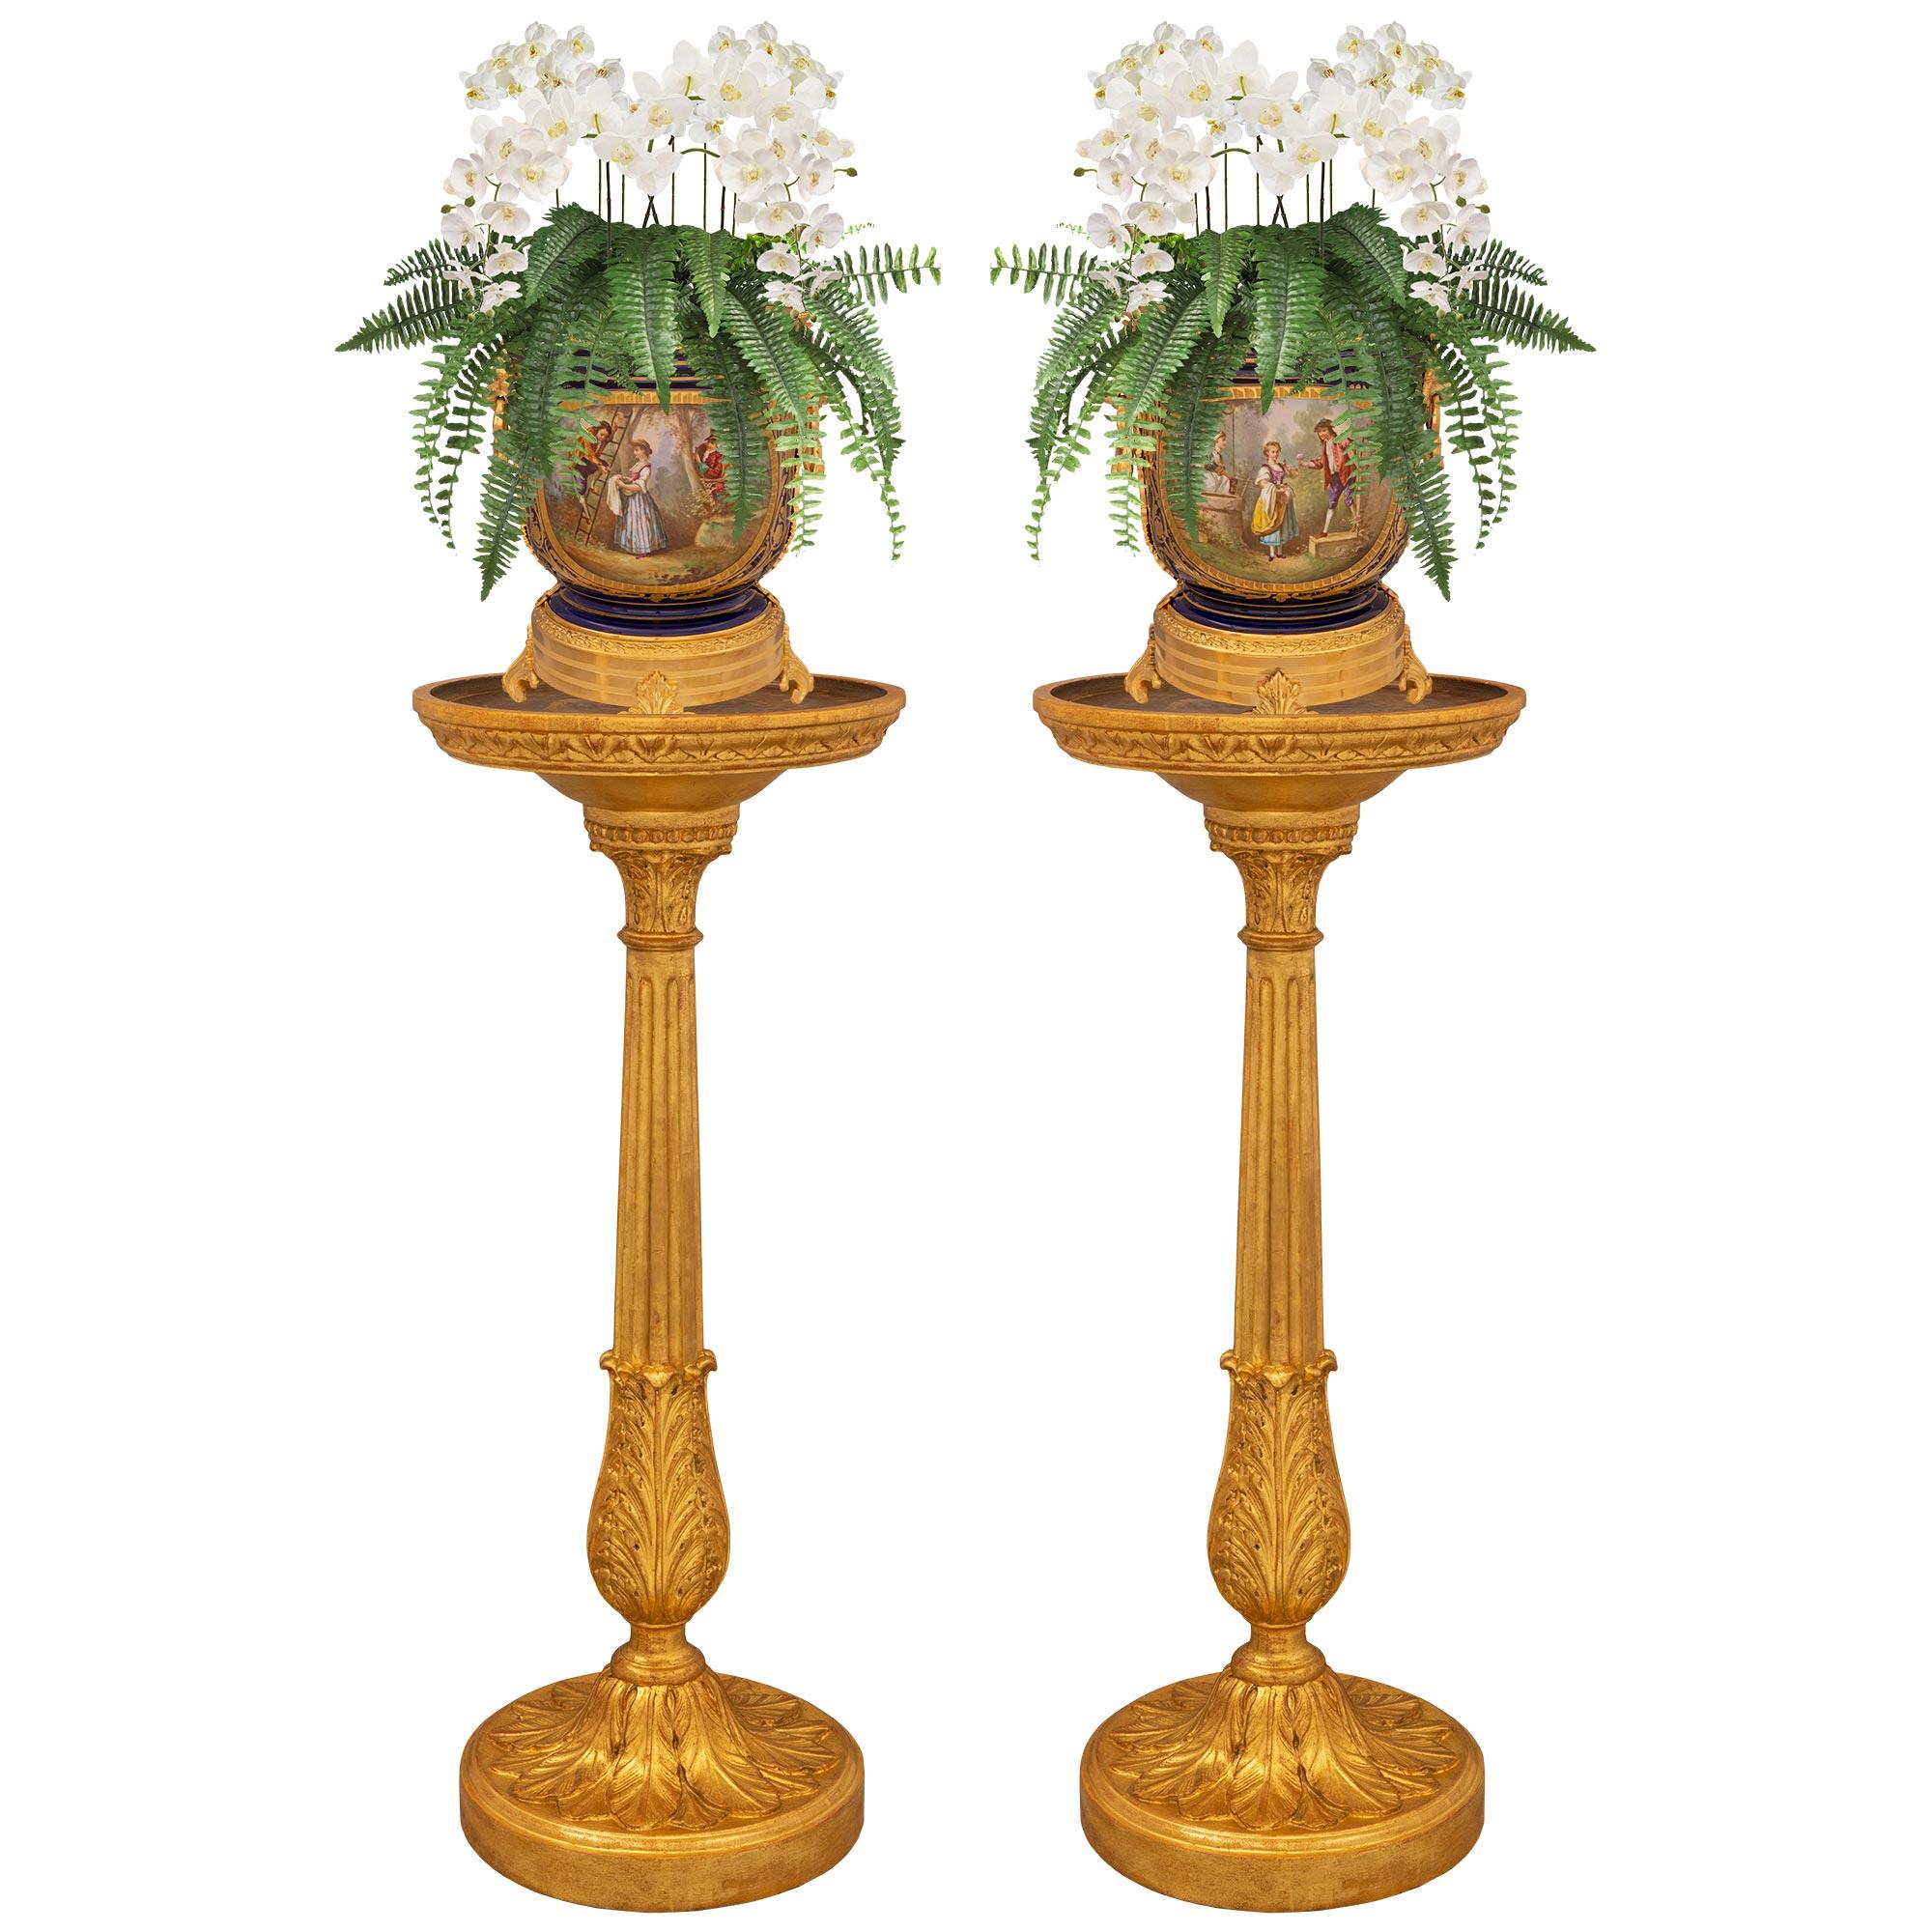 A beautiful and most elegant pair of French 18th century Louis XVI period giltwood and patinated wood pedestals/plant stands. Each pedestal is raised by a circular giltwood base with a fine mottled border and richly carved palmettes. The baluster